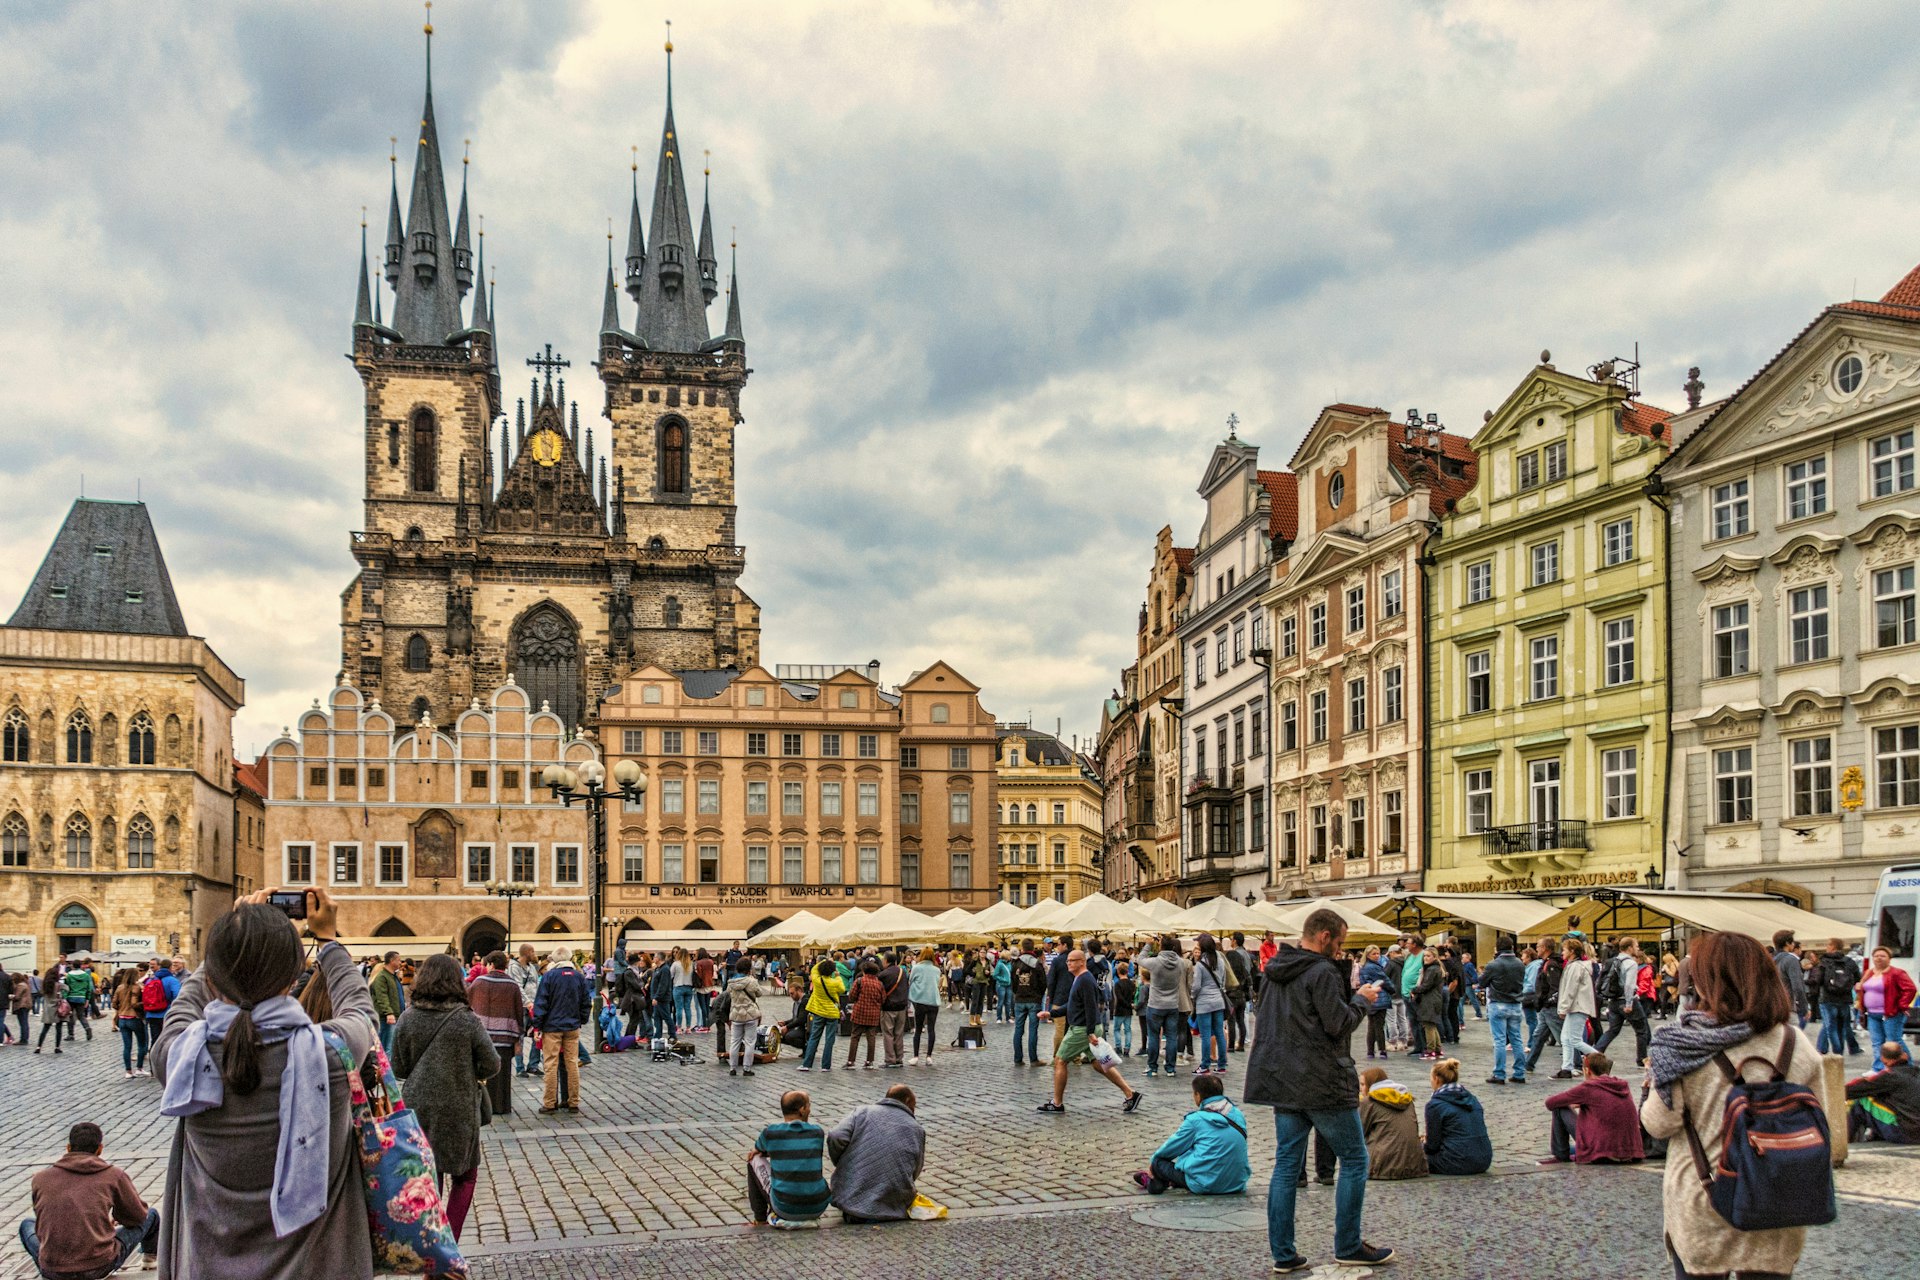 Tourists gather in a city square overlooked by twin Gothic church towers